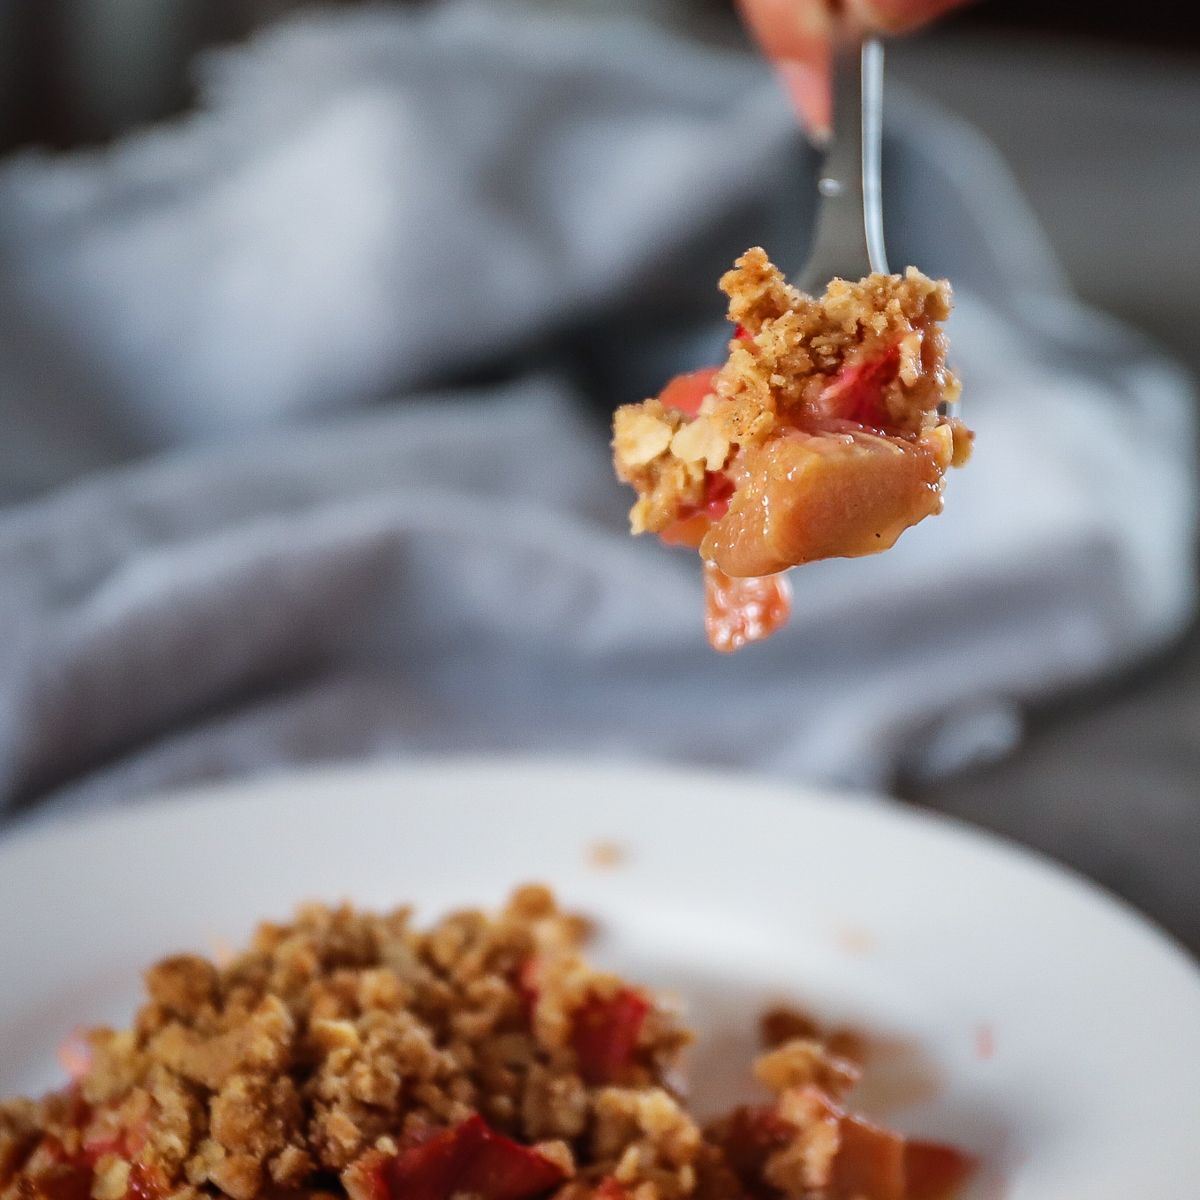 A forkful of rhubarb crumble being lifted up with juicy drips of rhubarb juice spilling off.